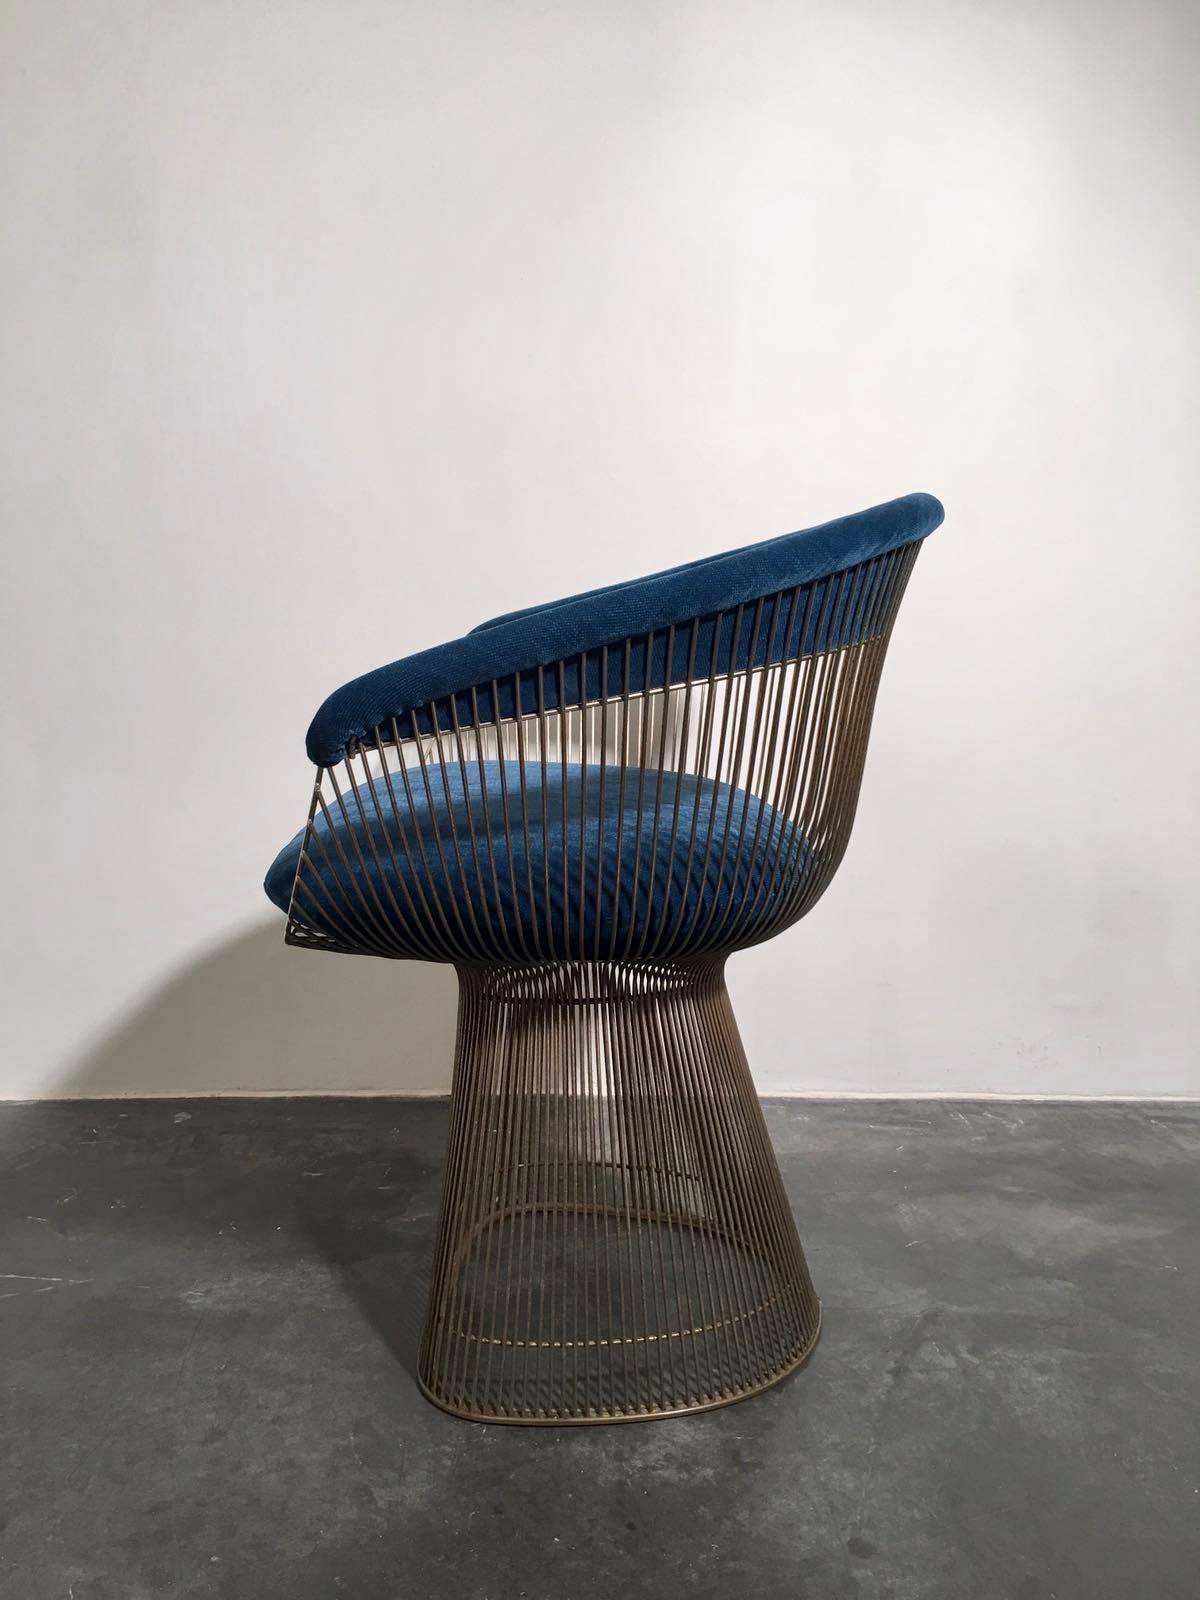 A very nice set of one armchair and two stools executed in nickel-plated steel by Warren Platner from the Platner collection for Knoll, 1970s.
New upholstered in a blue velvet, in excellent condition.
Measurements of the stools:
diameter 45cm x